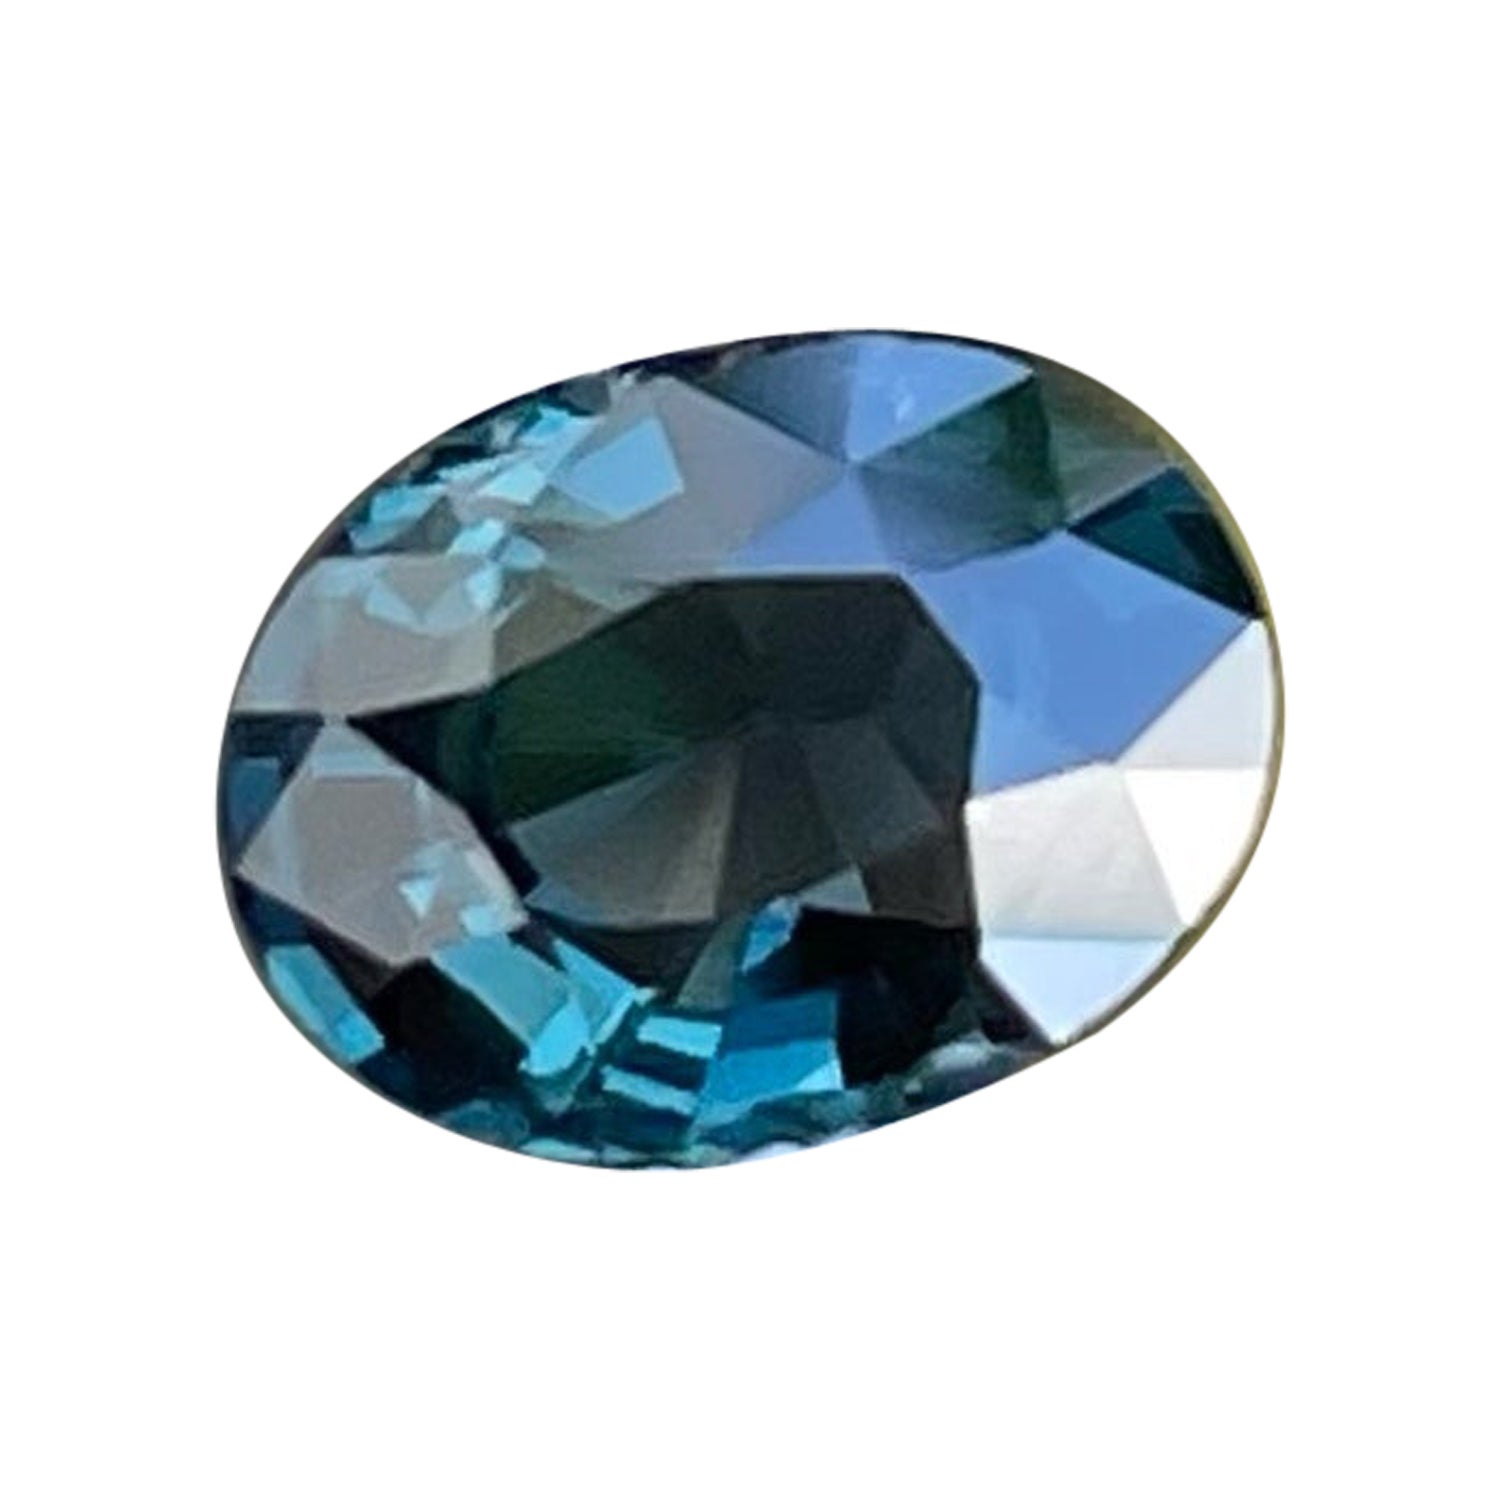 Precious Cobalt Blue Natural Spinel Stone 1.05 Carats AIG Certified Spinel